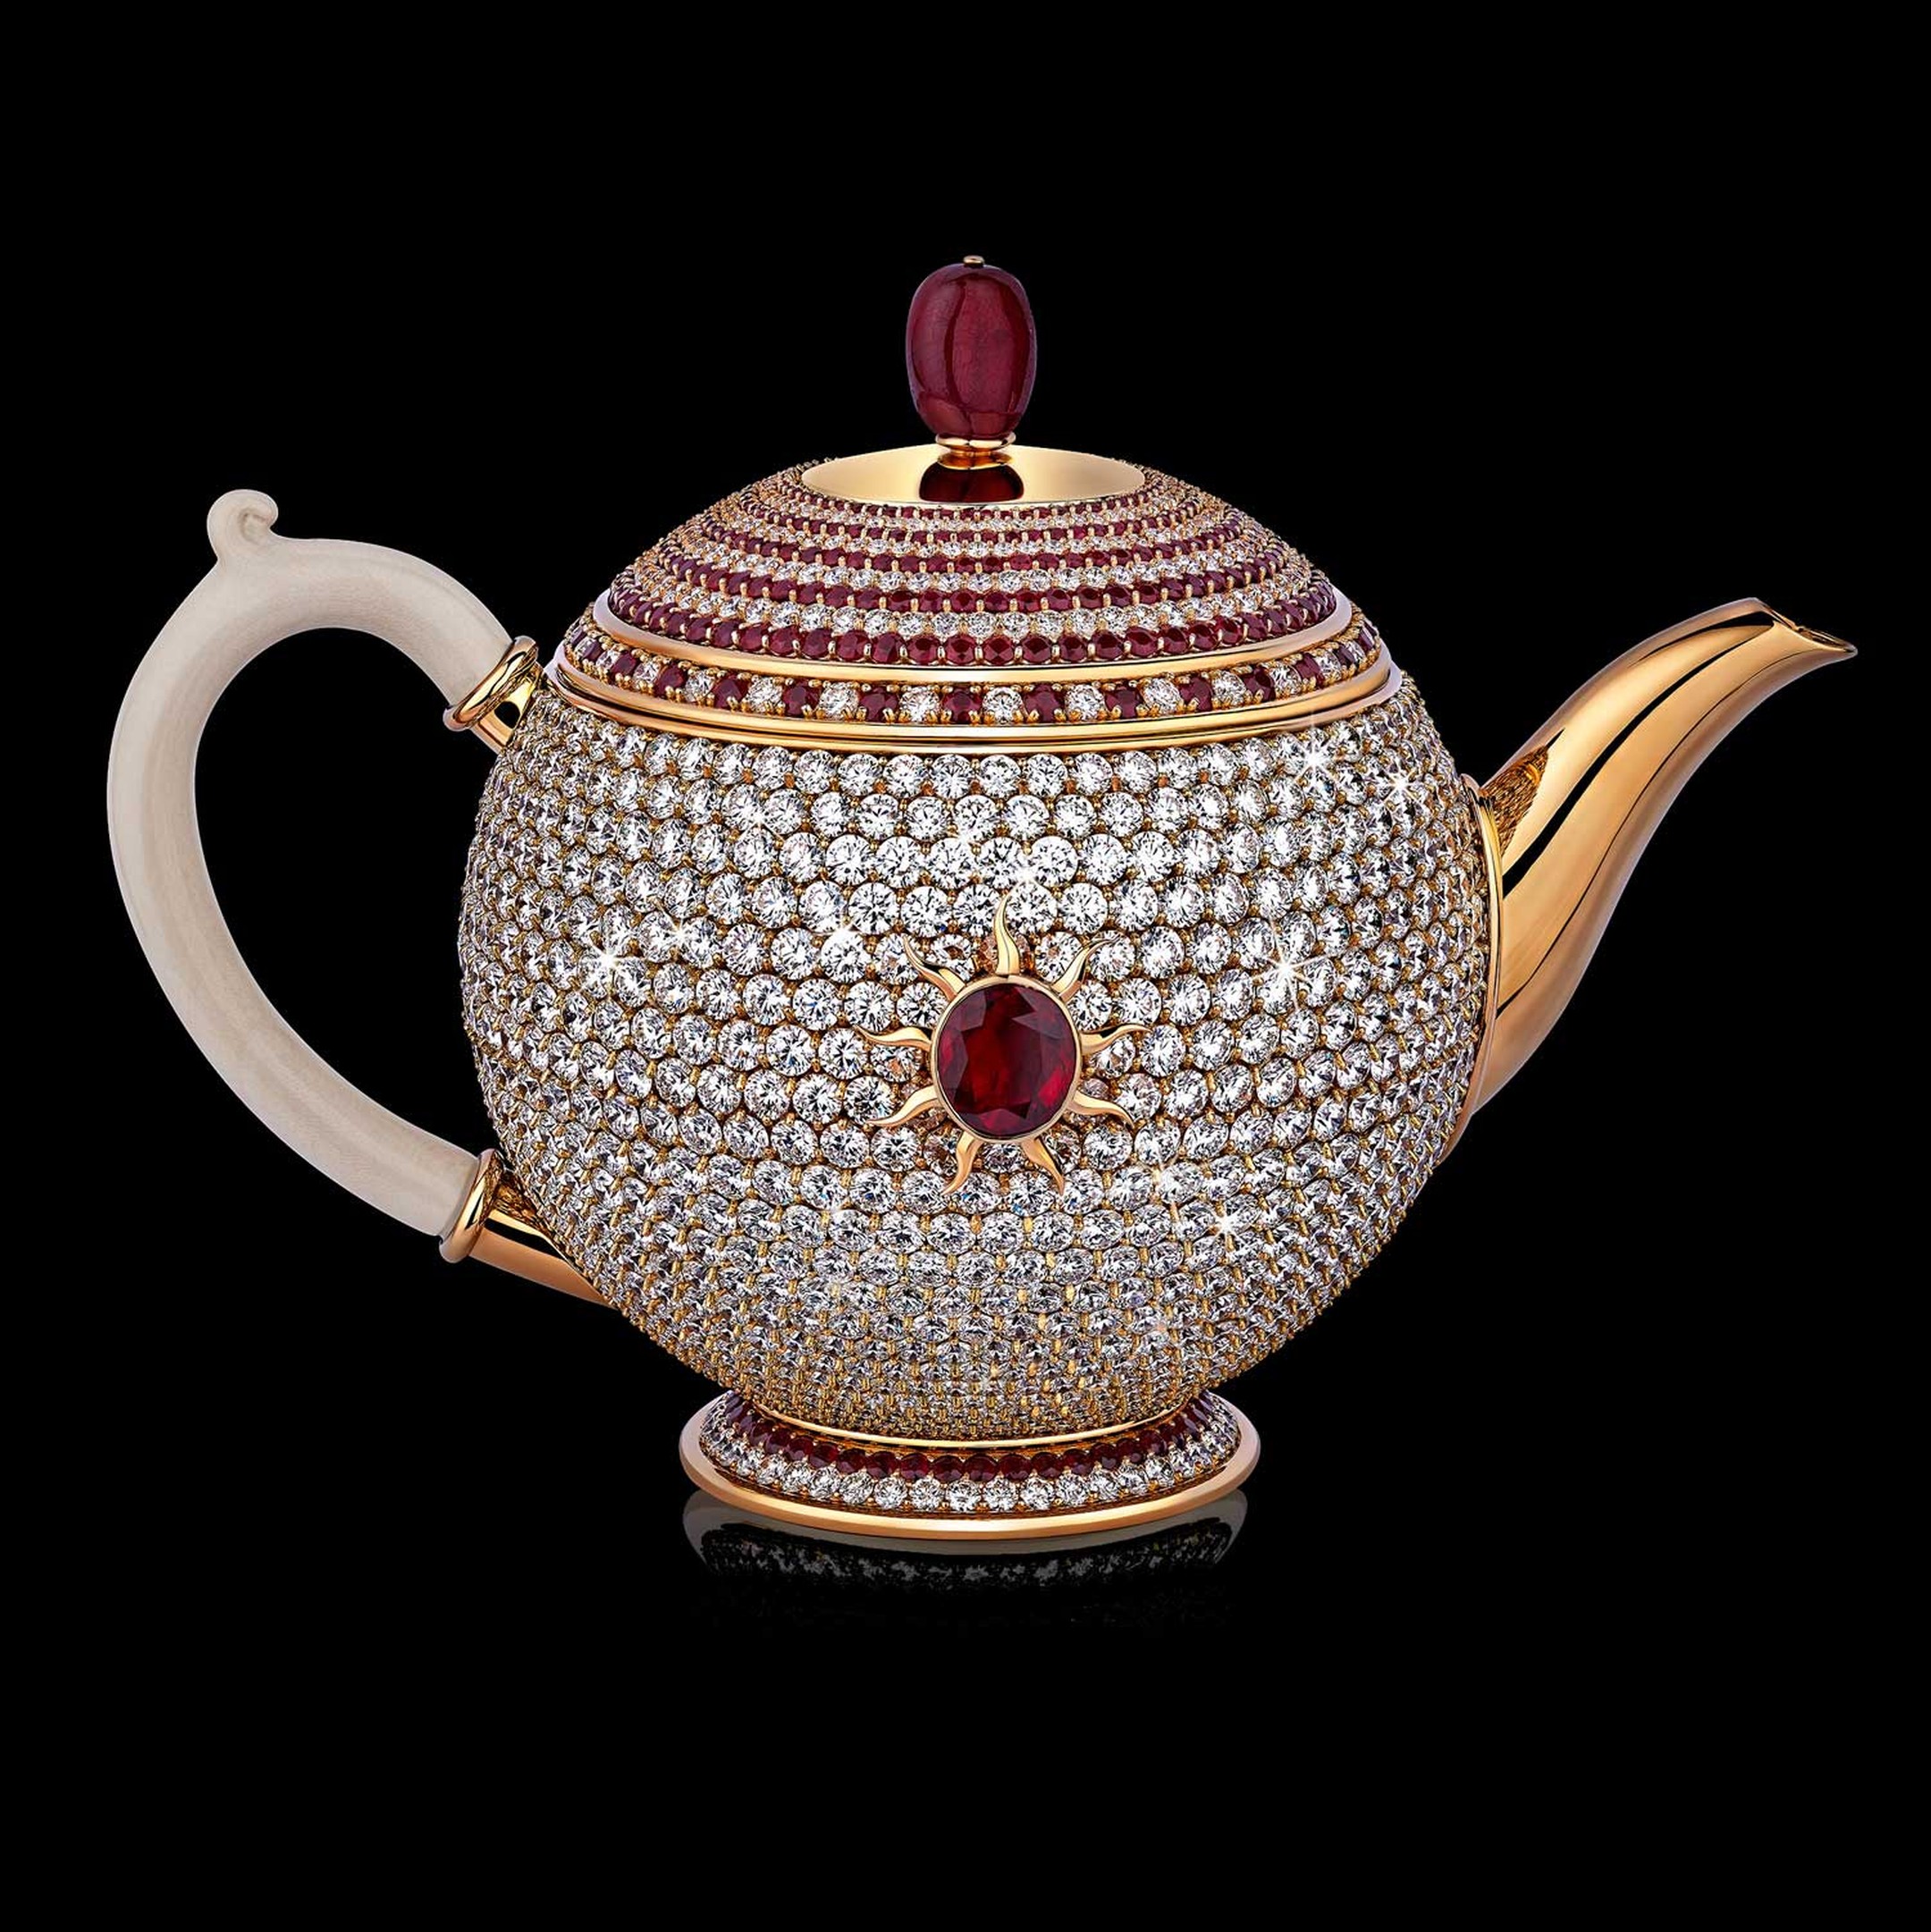 The world's most expensive teapot